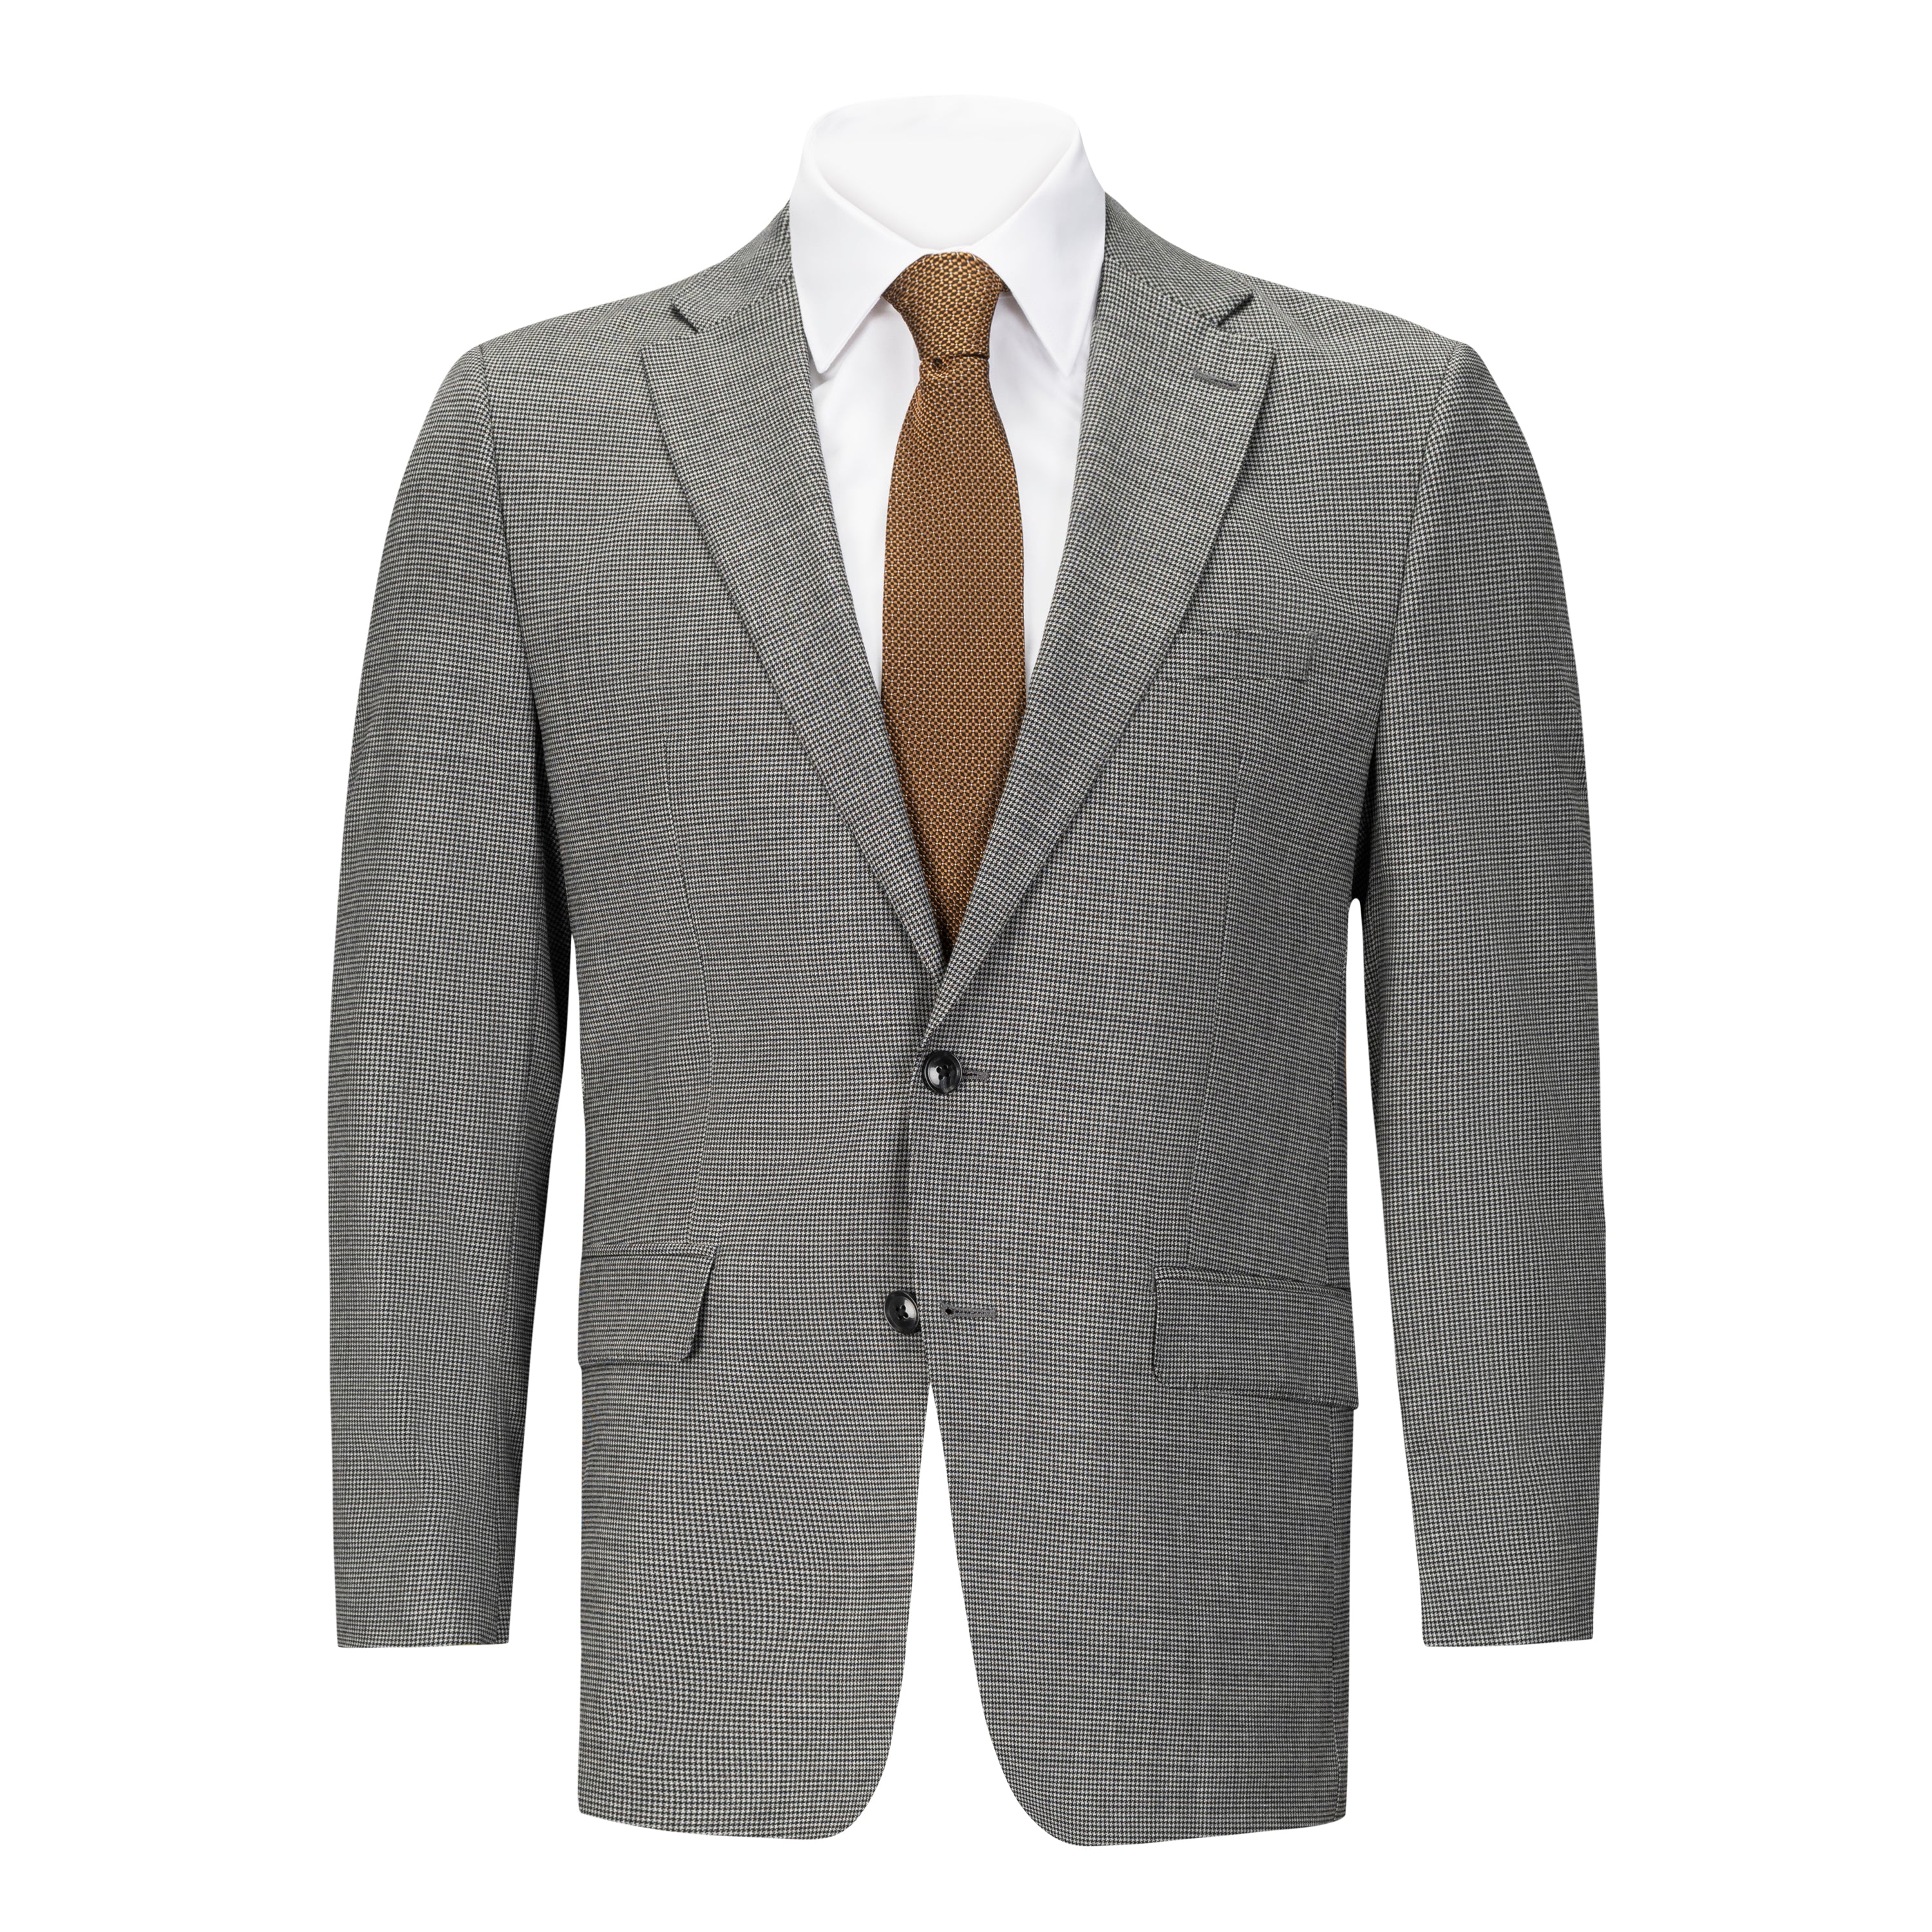 CALVIN KLEIN BLACK AND GREY HOUNDSTOOTH SUIT – Miltons - The Store